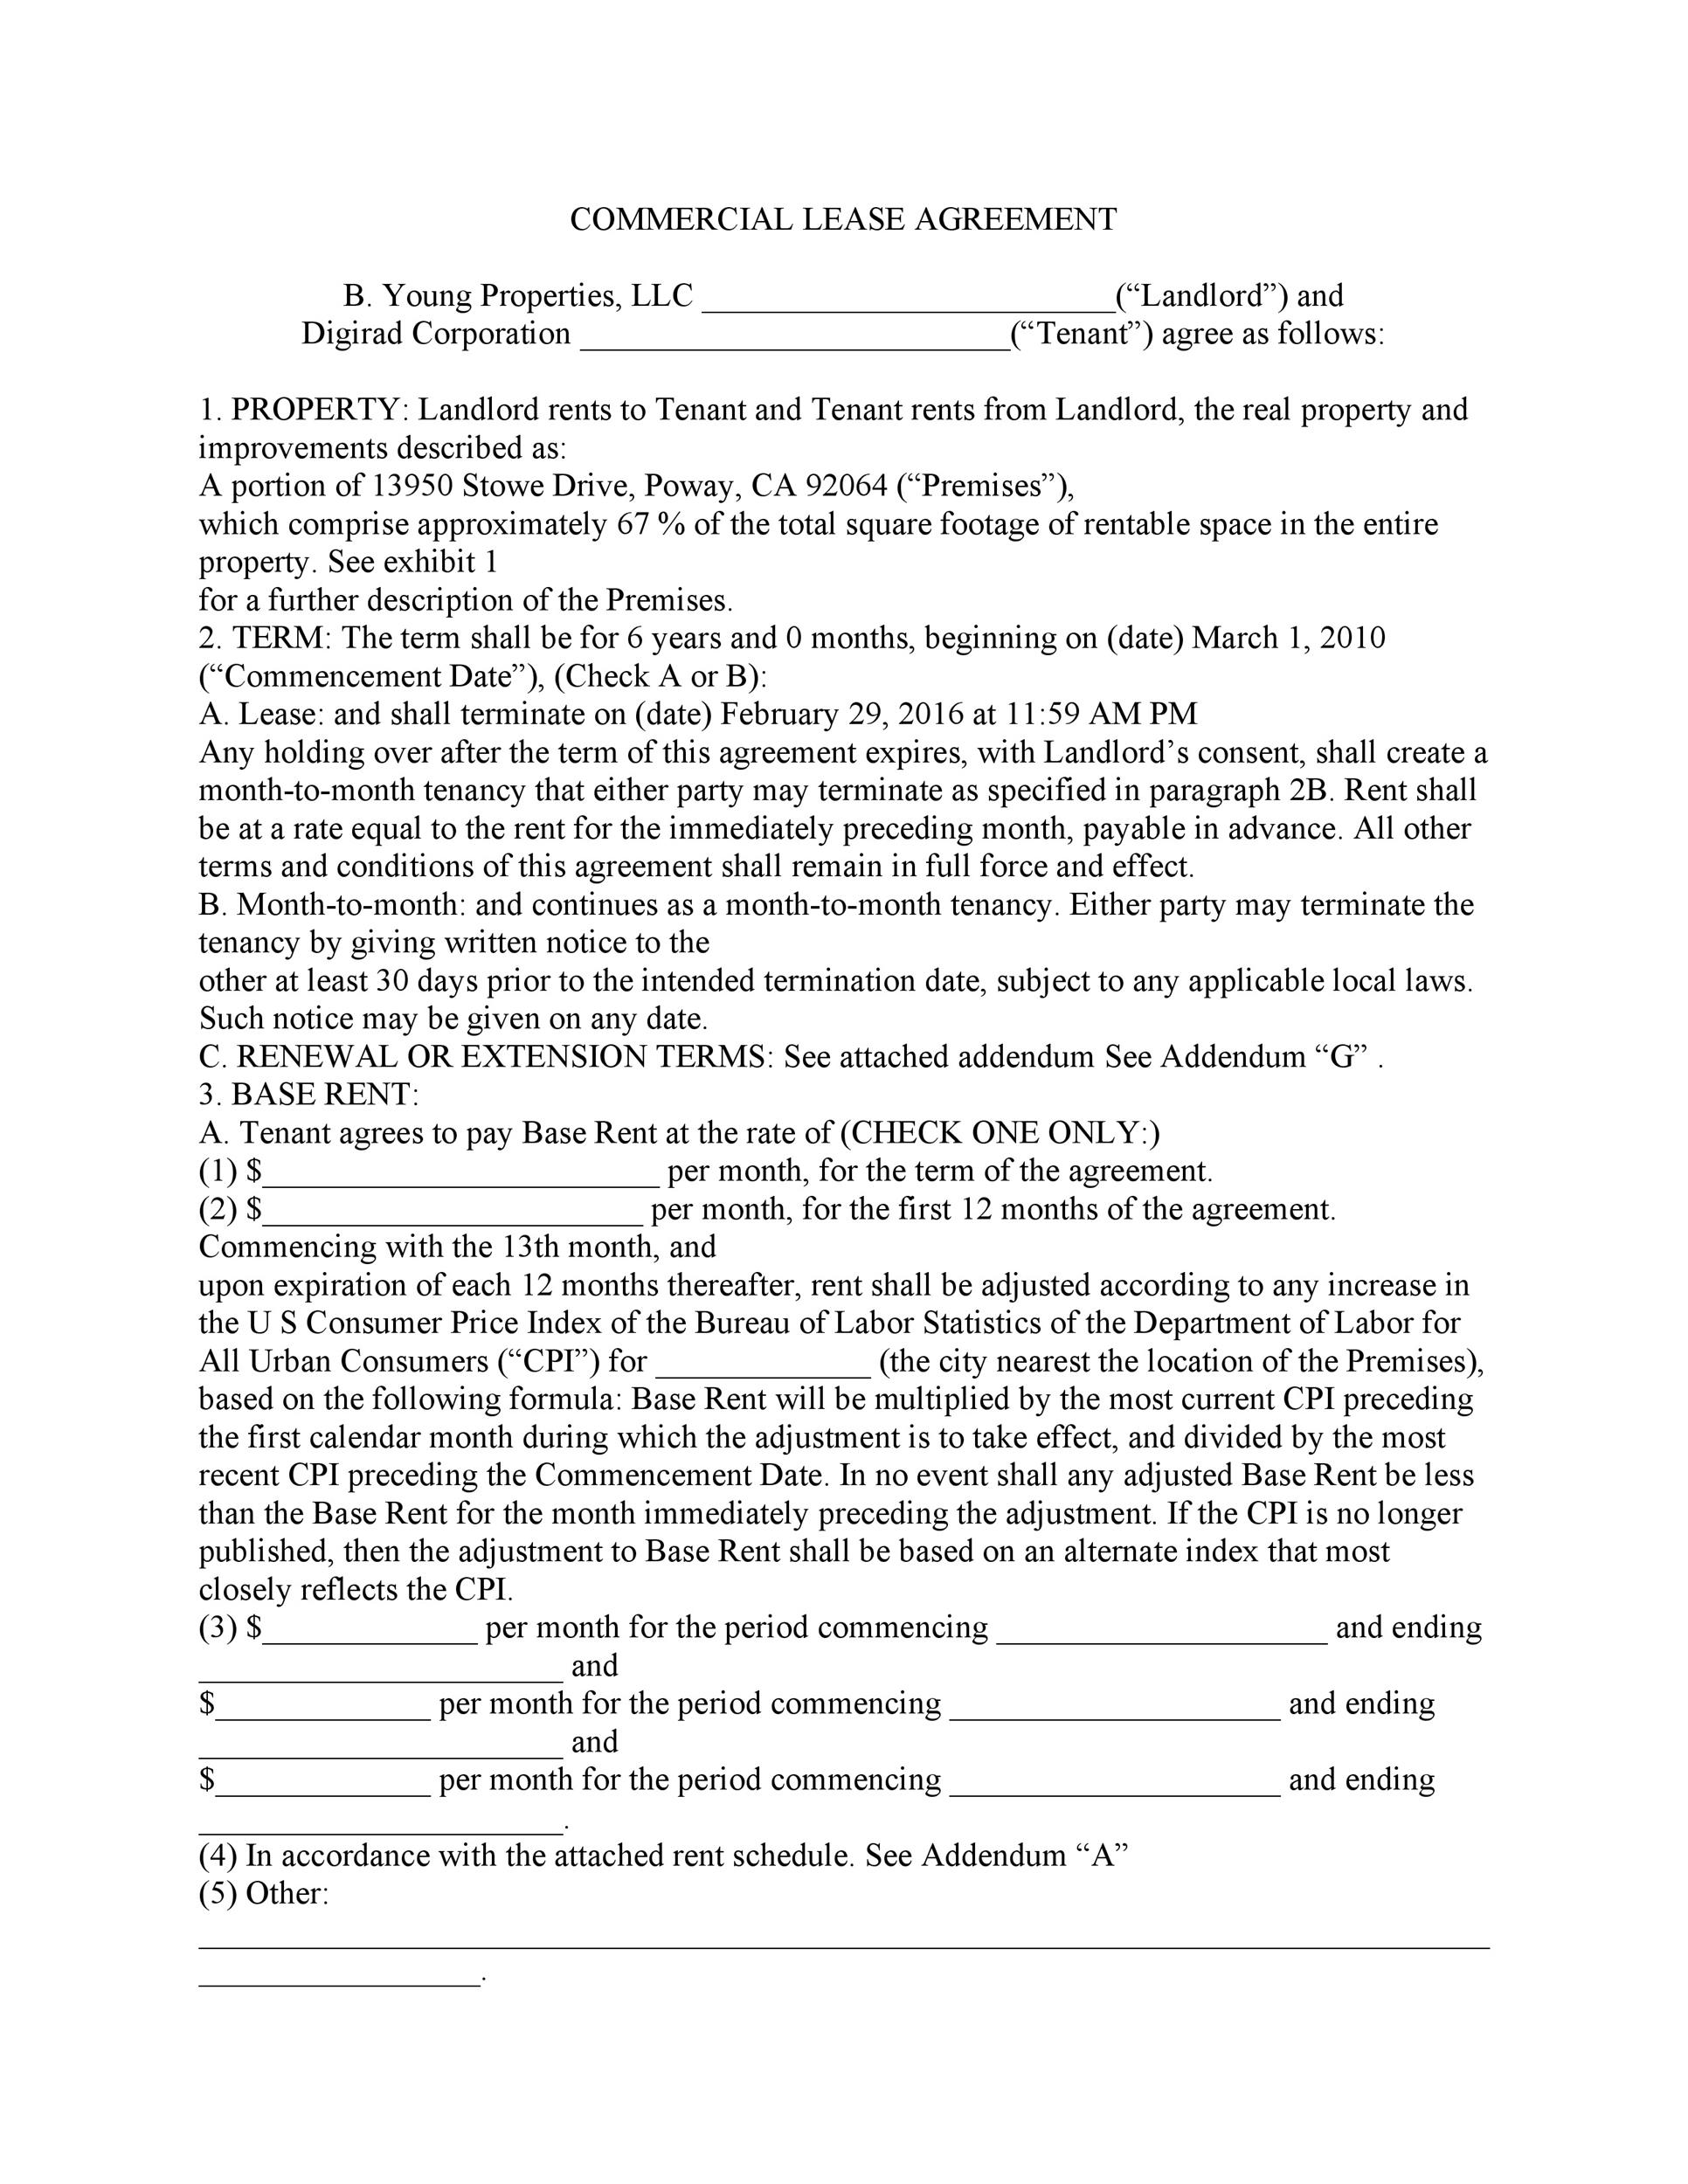 assignment clause commercial lease